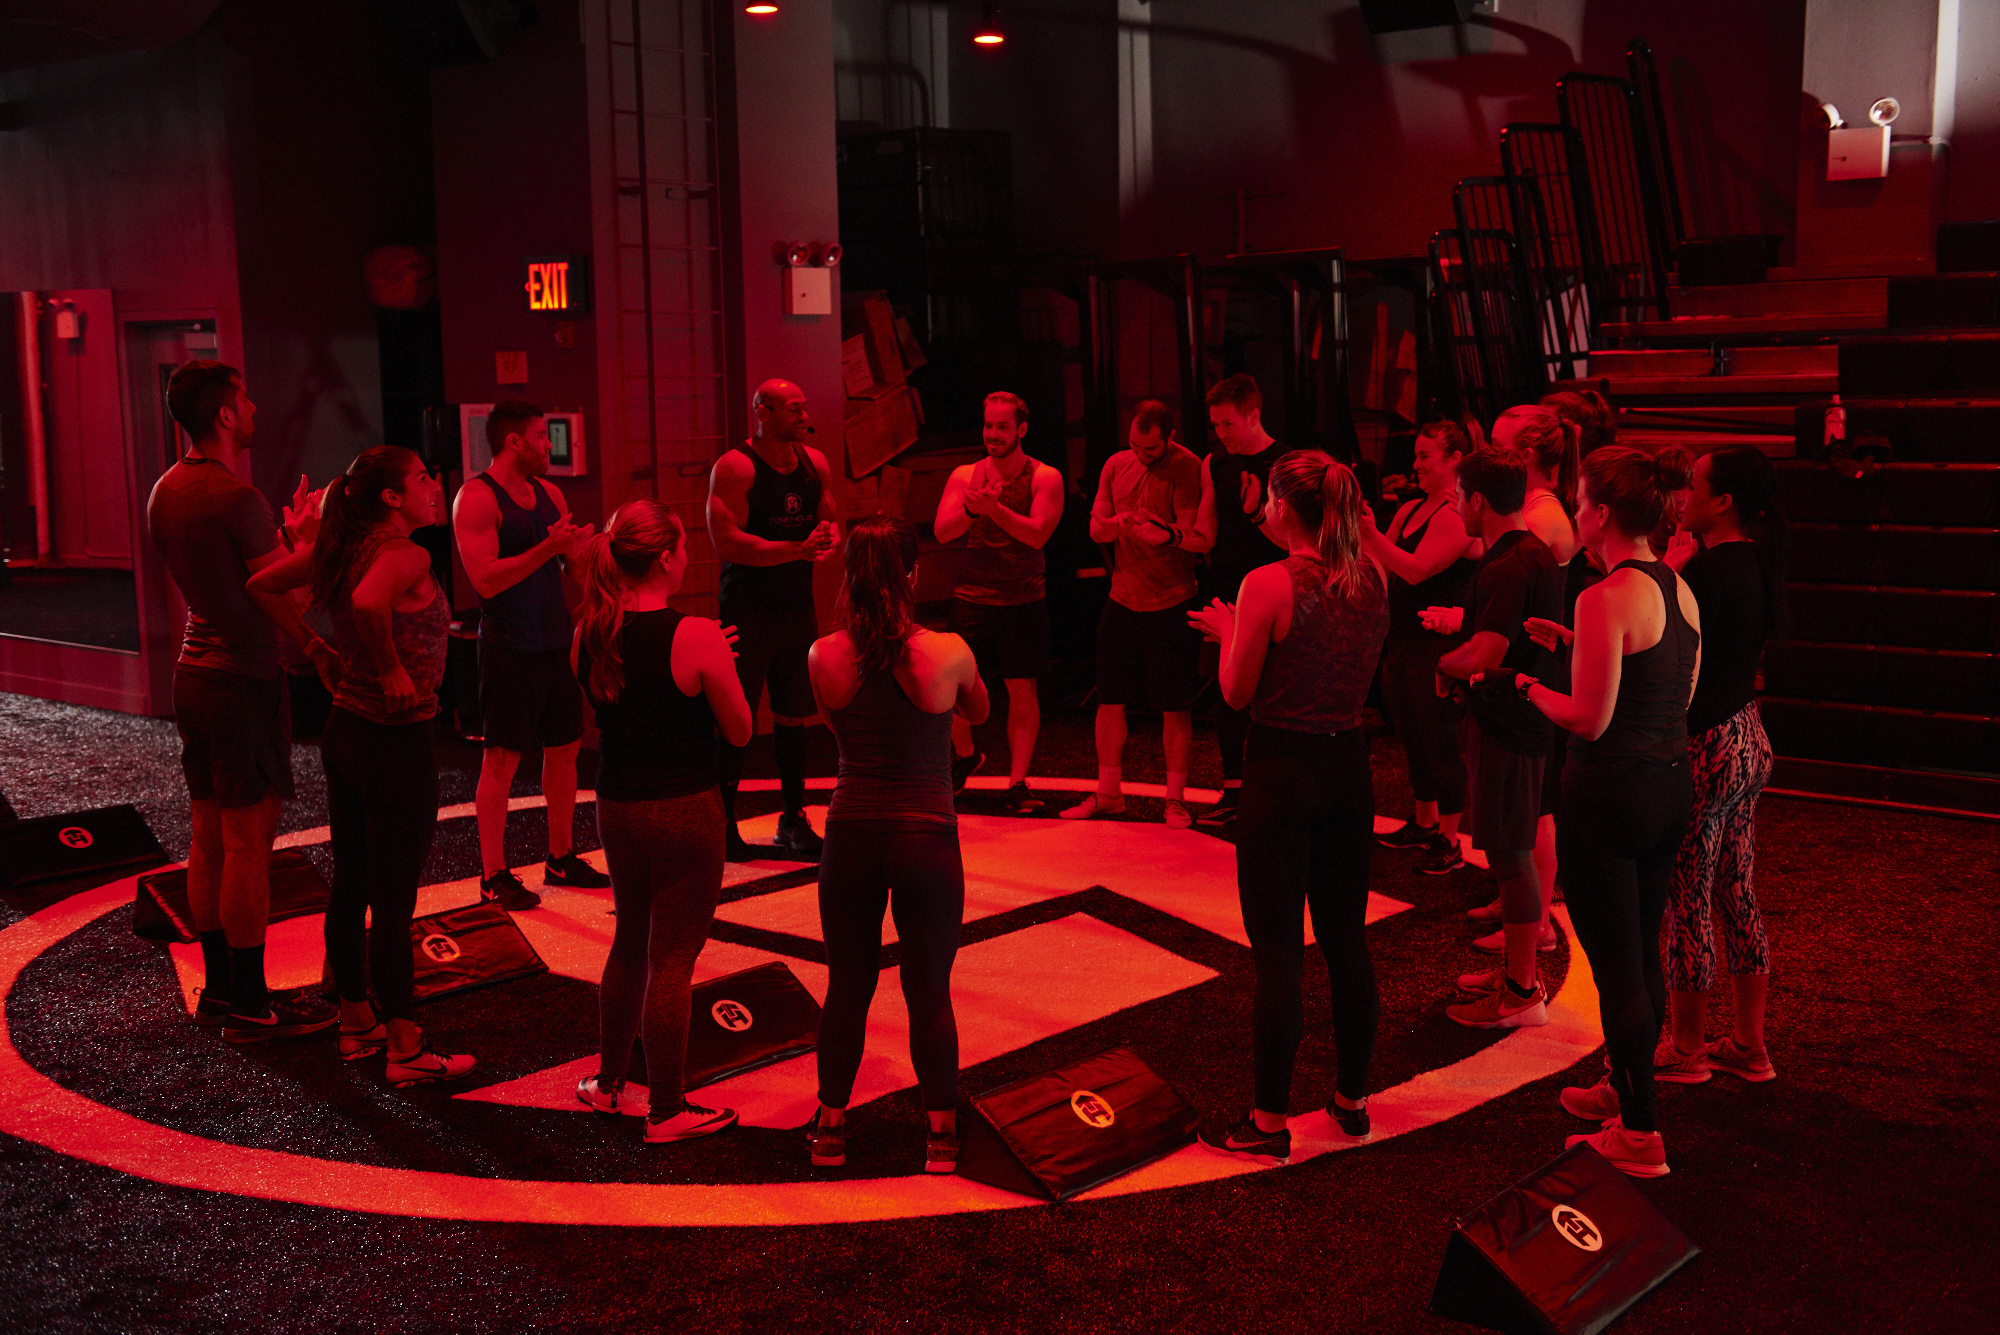 A fiery circle of hell, or a casual workout? 